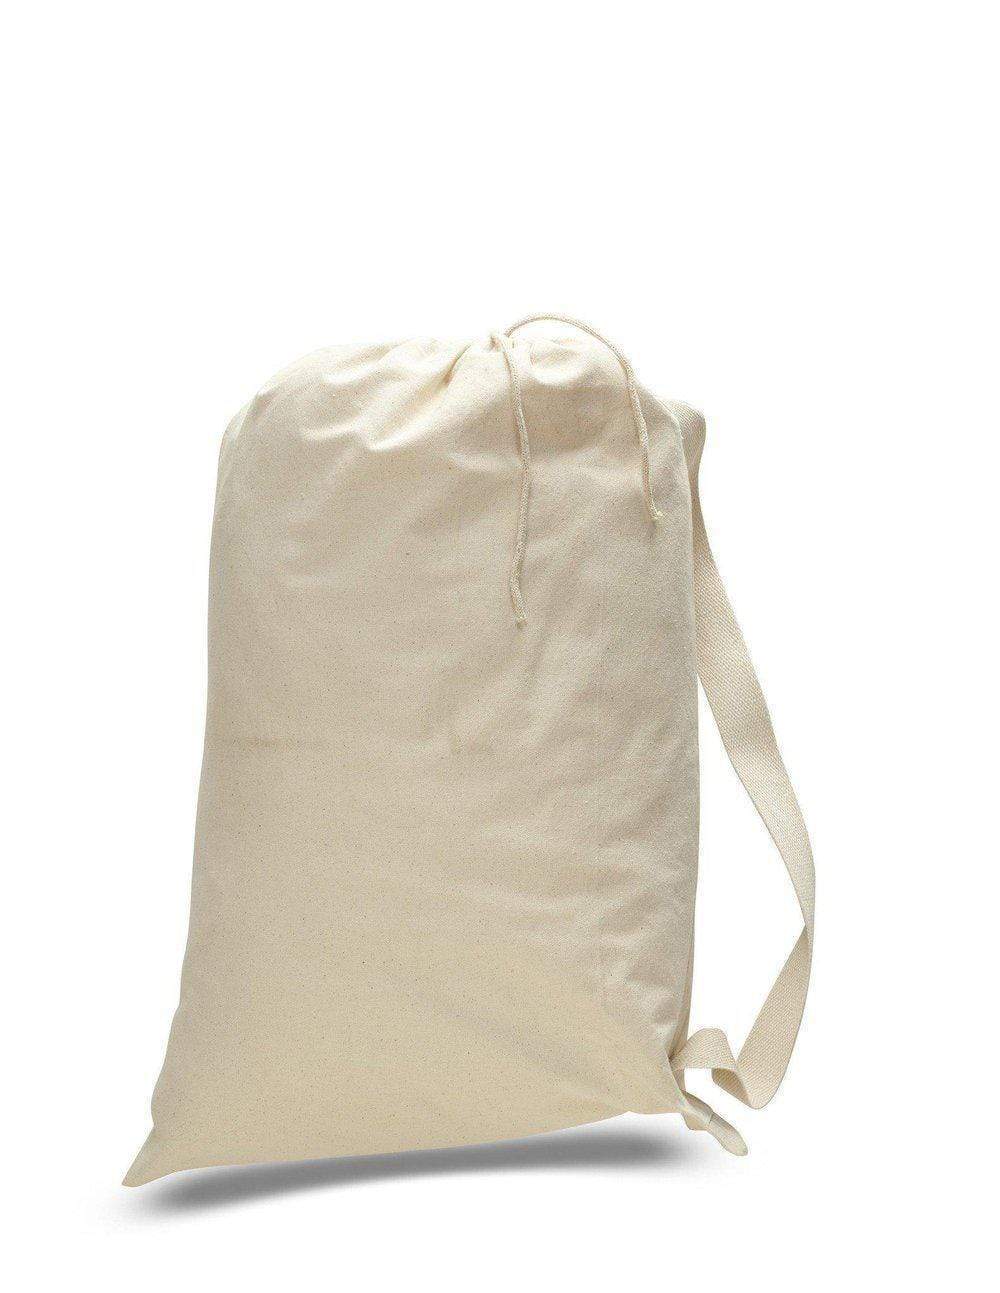 Wholesale Canvas Laundry Bags | Drawstring Laundry Bags in Bulk – BagzDepot™